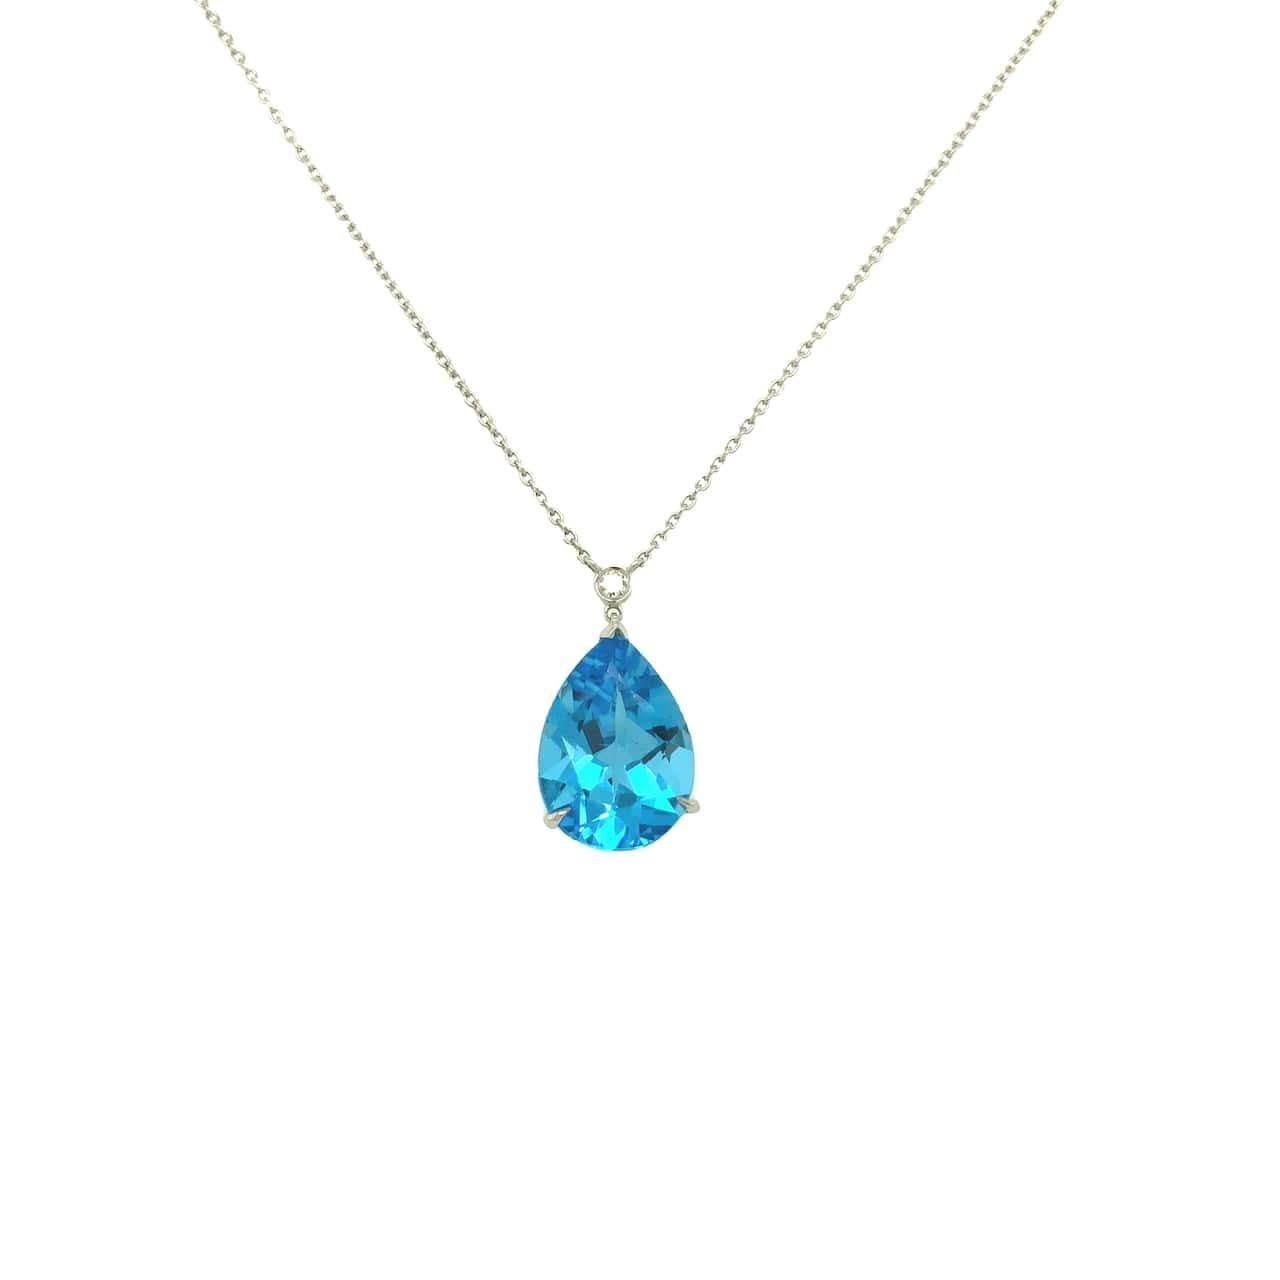 Gems Are Forever 8.87 carat Pear Shape Blue Topaz & Diamond Pendant Necklace 14K In New Condition For Sale In beverly hills, CA